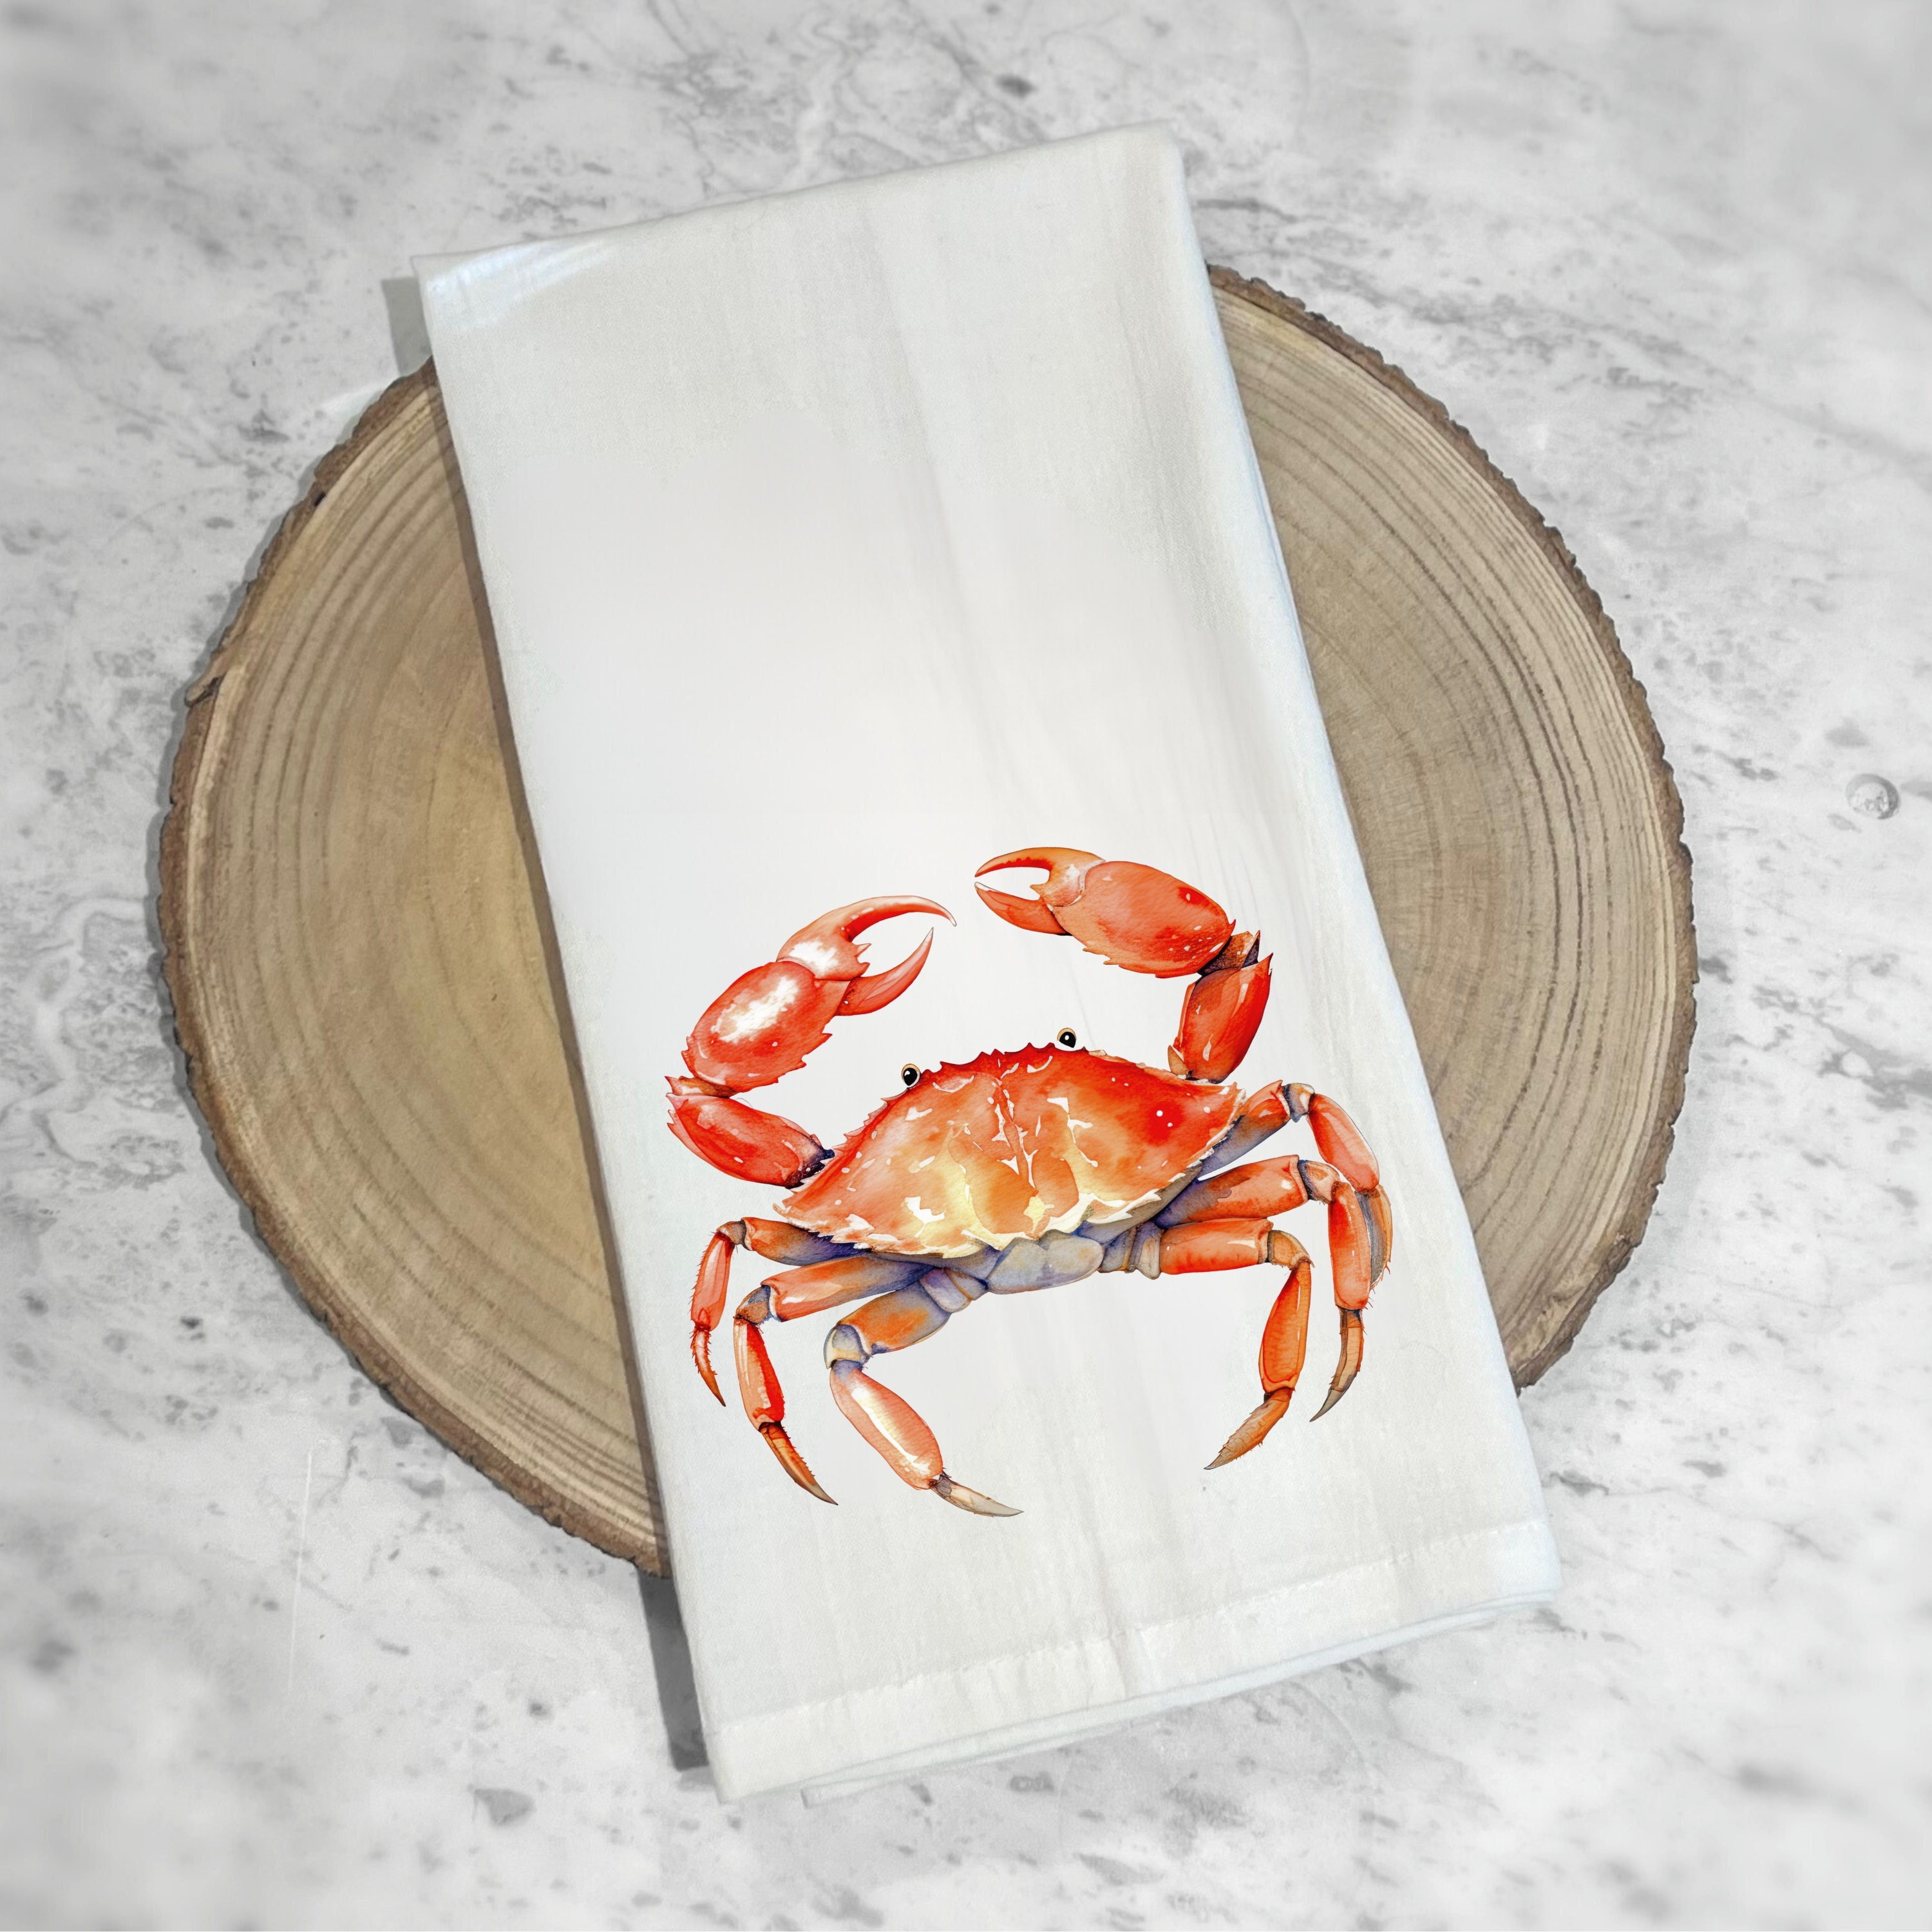 Crab Metal and Glass Cooking Utensil Jar – Specialty Decor by